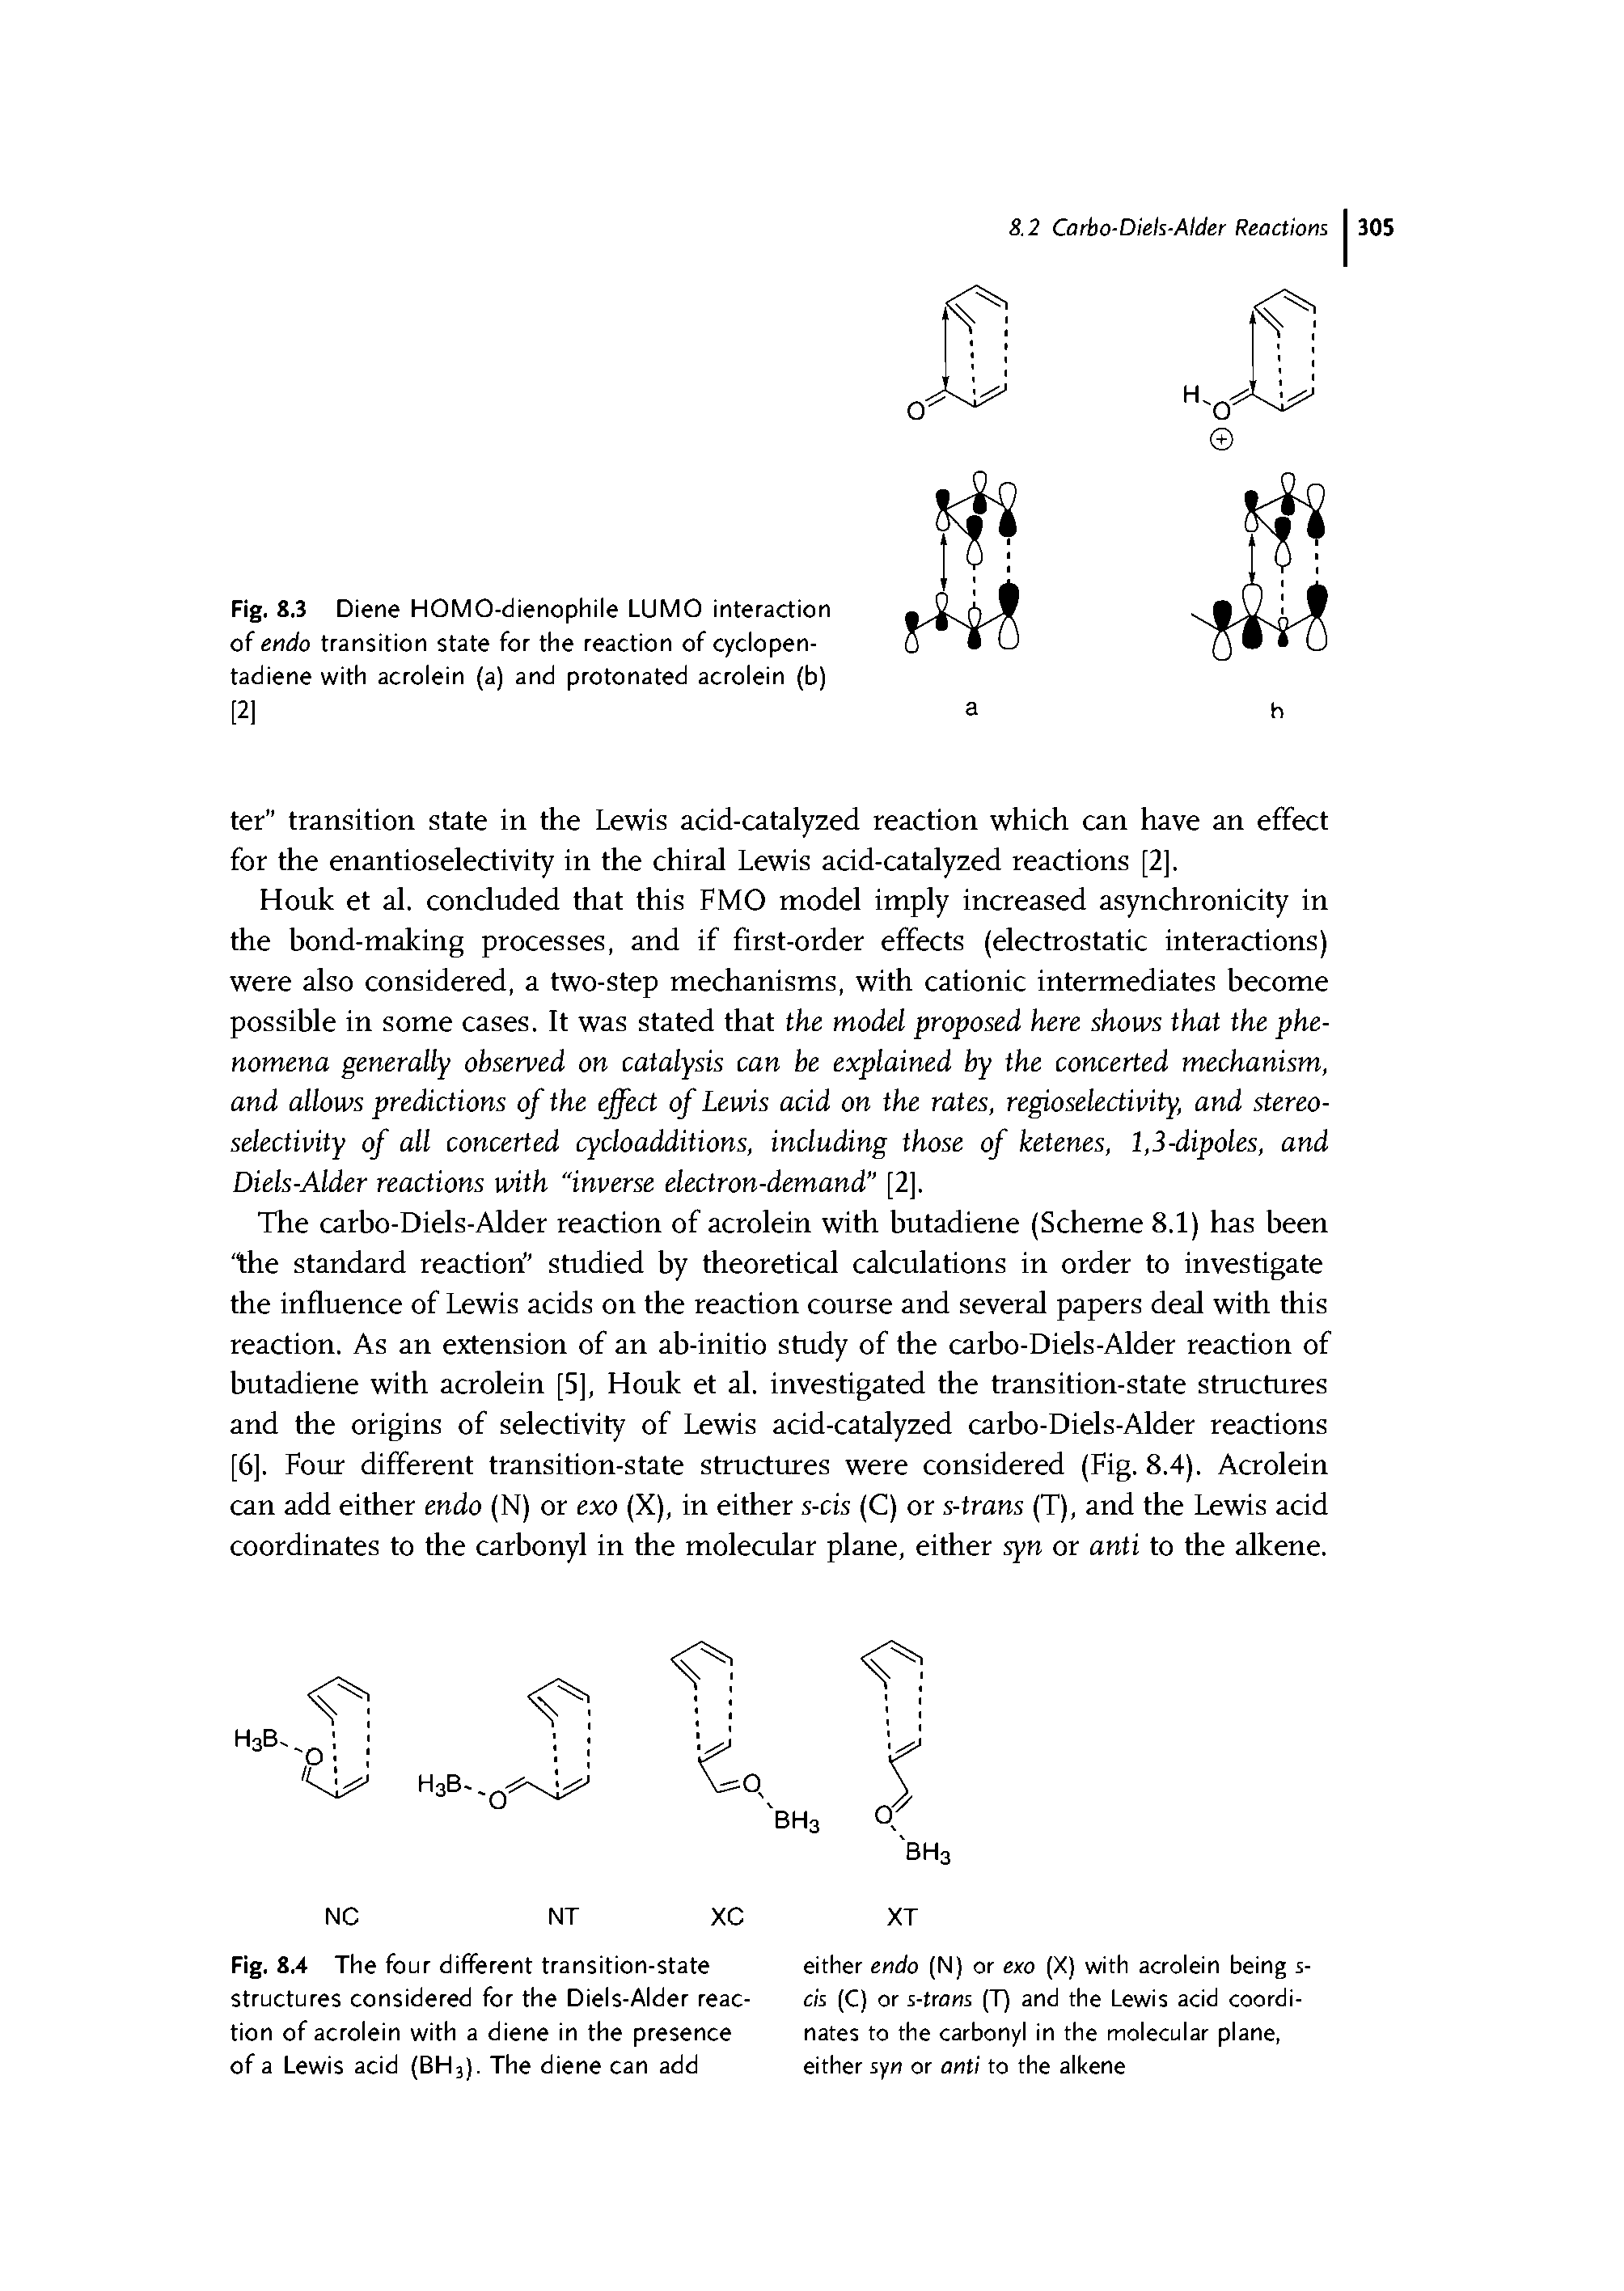 Fig. 8.4 The four different transition-state structures considered for the Diels-Alder reaction of acrolein with a diene in the presence of a Lewis acid (BH3). The diene can add...